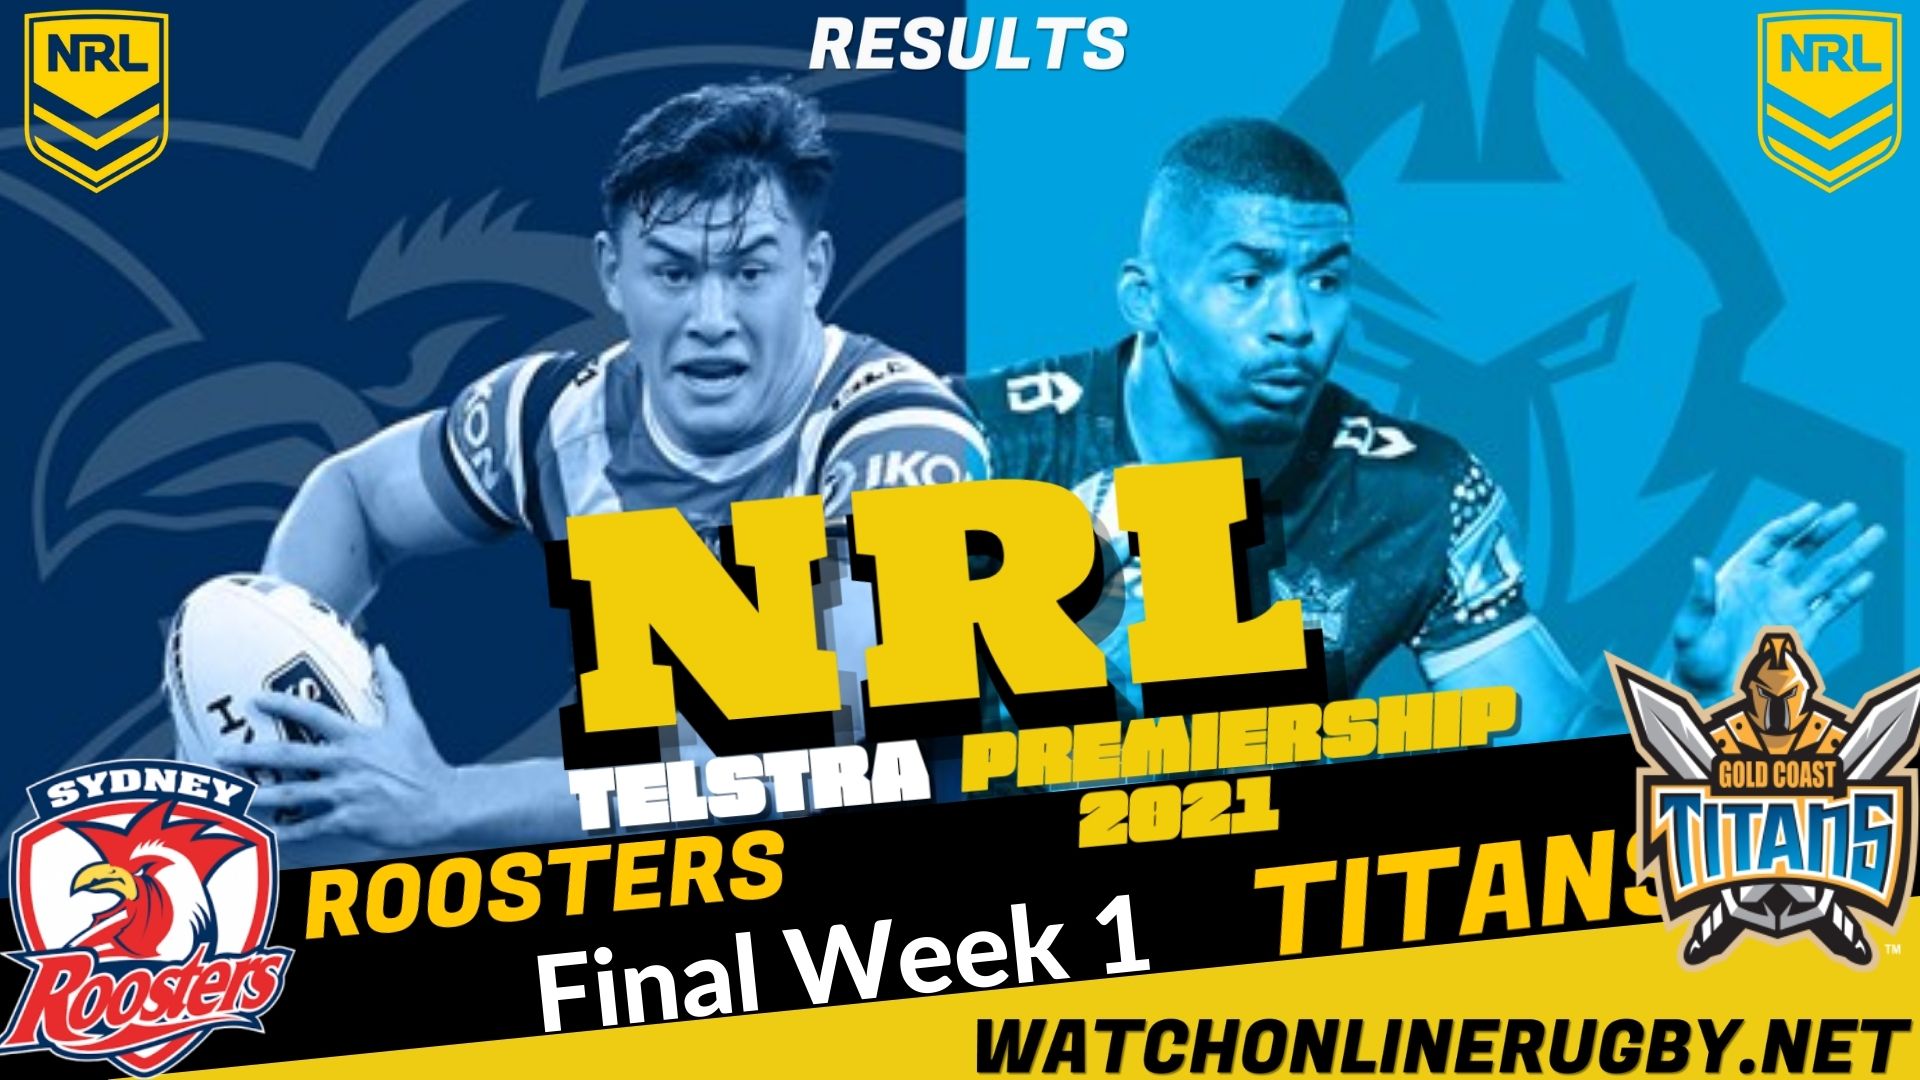 Roosters Vs Titans Highlights Final Week 1 NRL Rugby